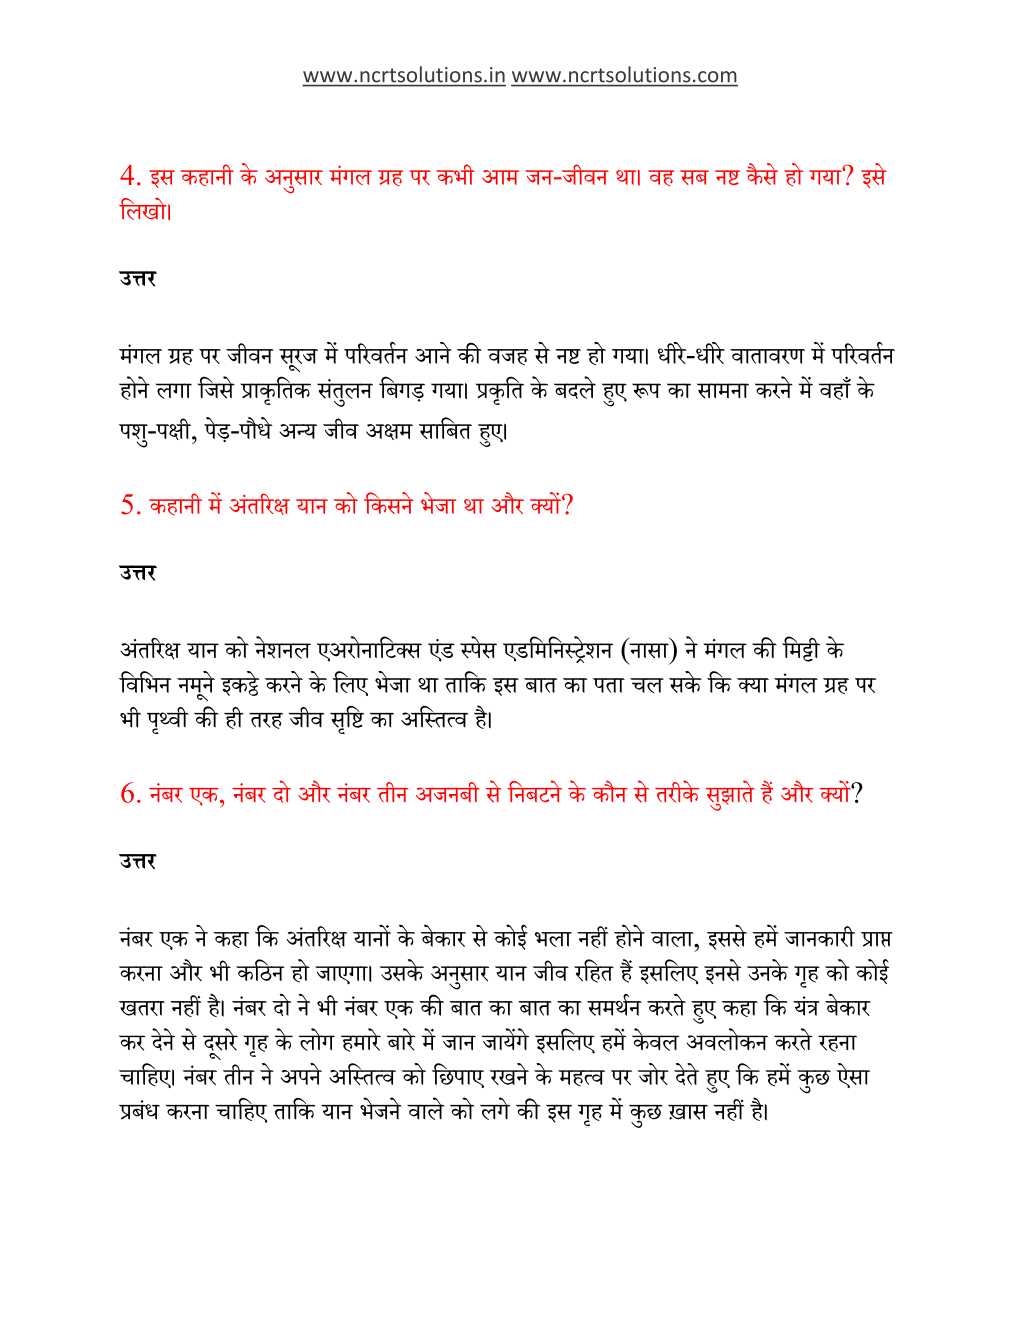 NCERT Solutions For Class 6 Hindi Vasant Chapter 6